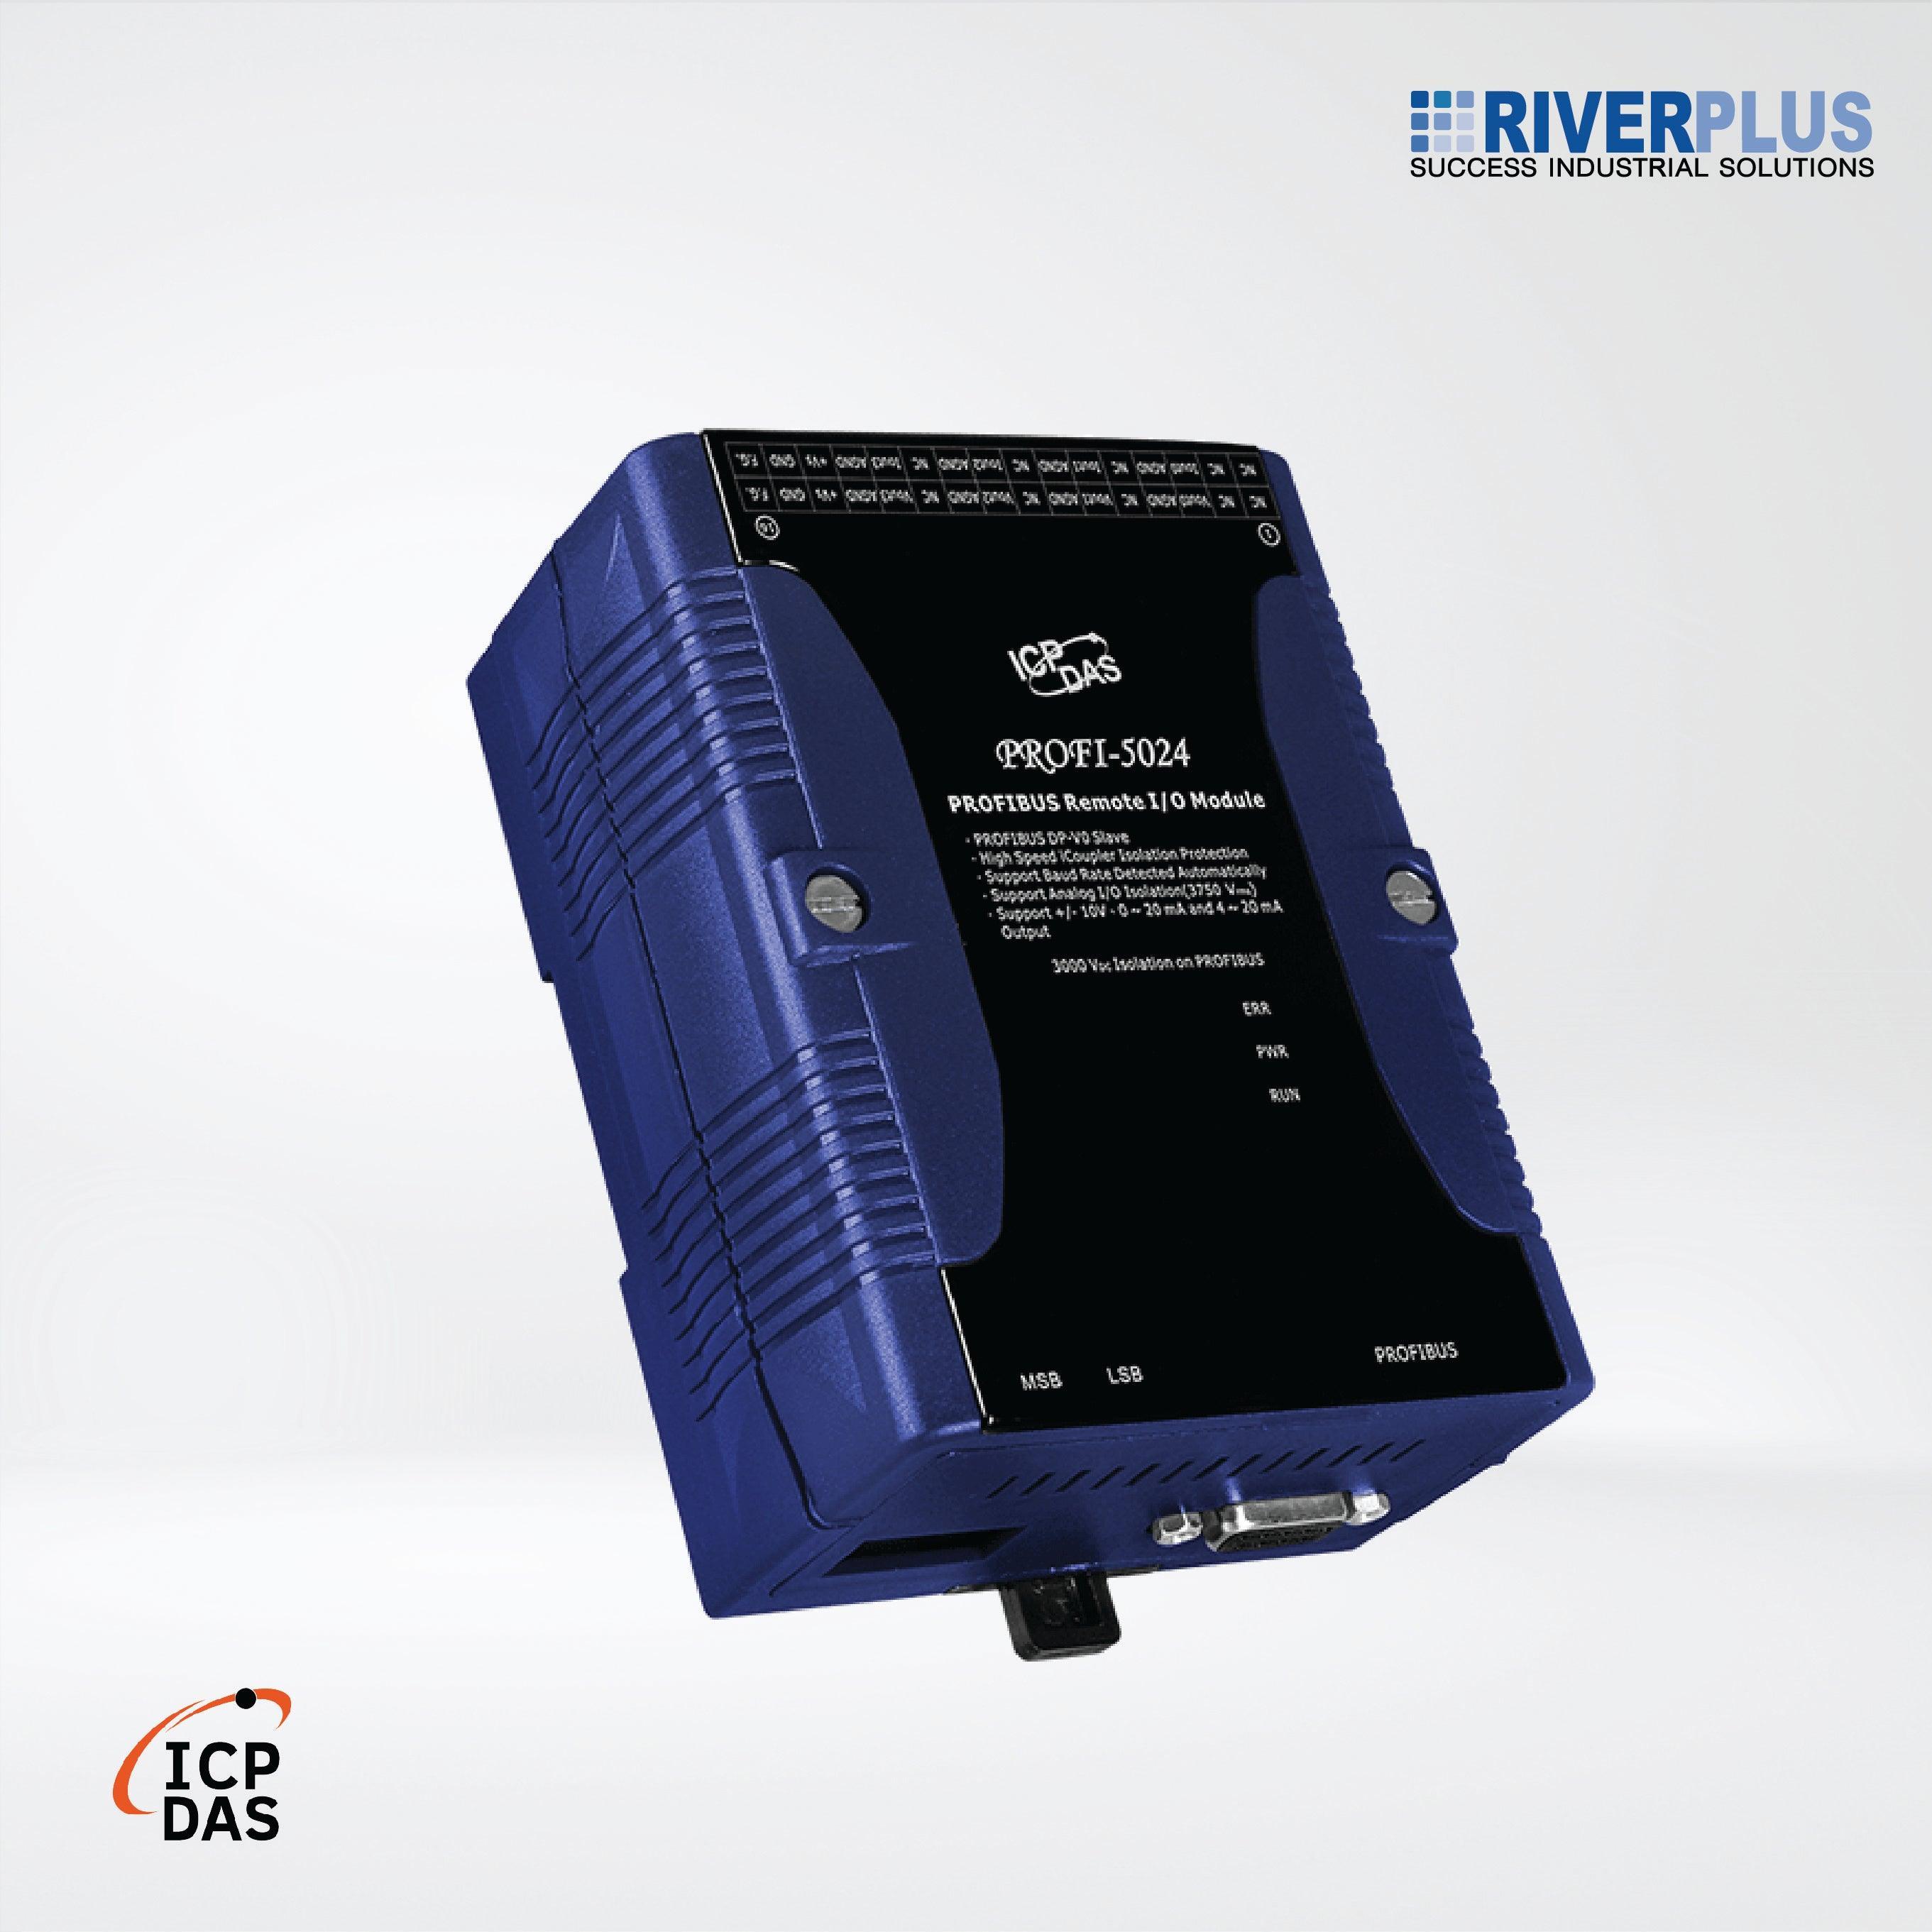 PROFI-5024 PROFIBUS Remote I/O Module (4-channel Isolated Analog Voltage & Current Output) - Riverplus